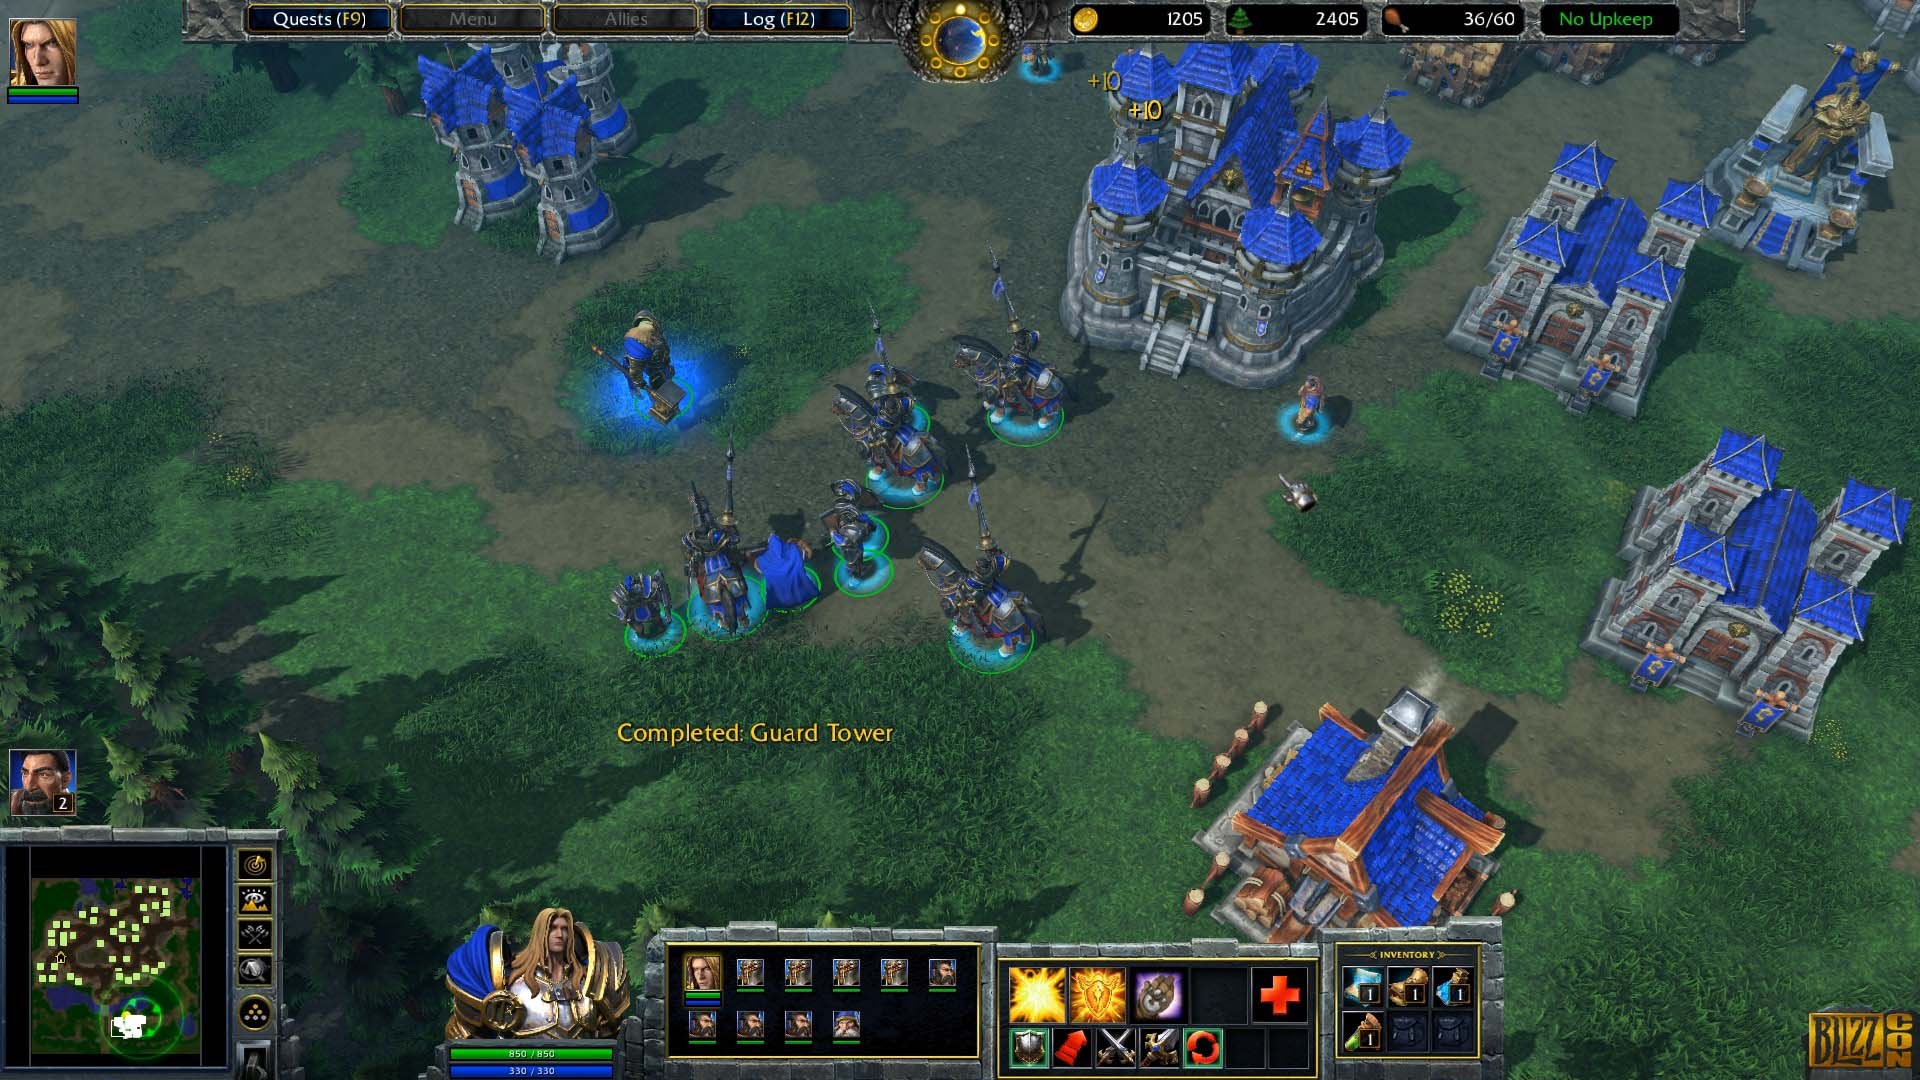 Warcraft III Reforged - Campaign gameplay